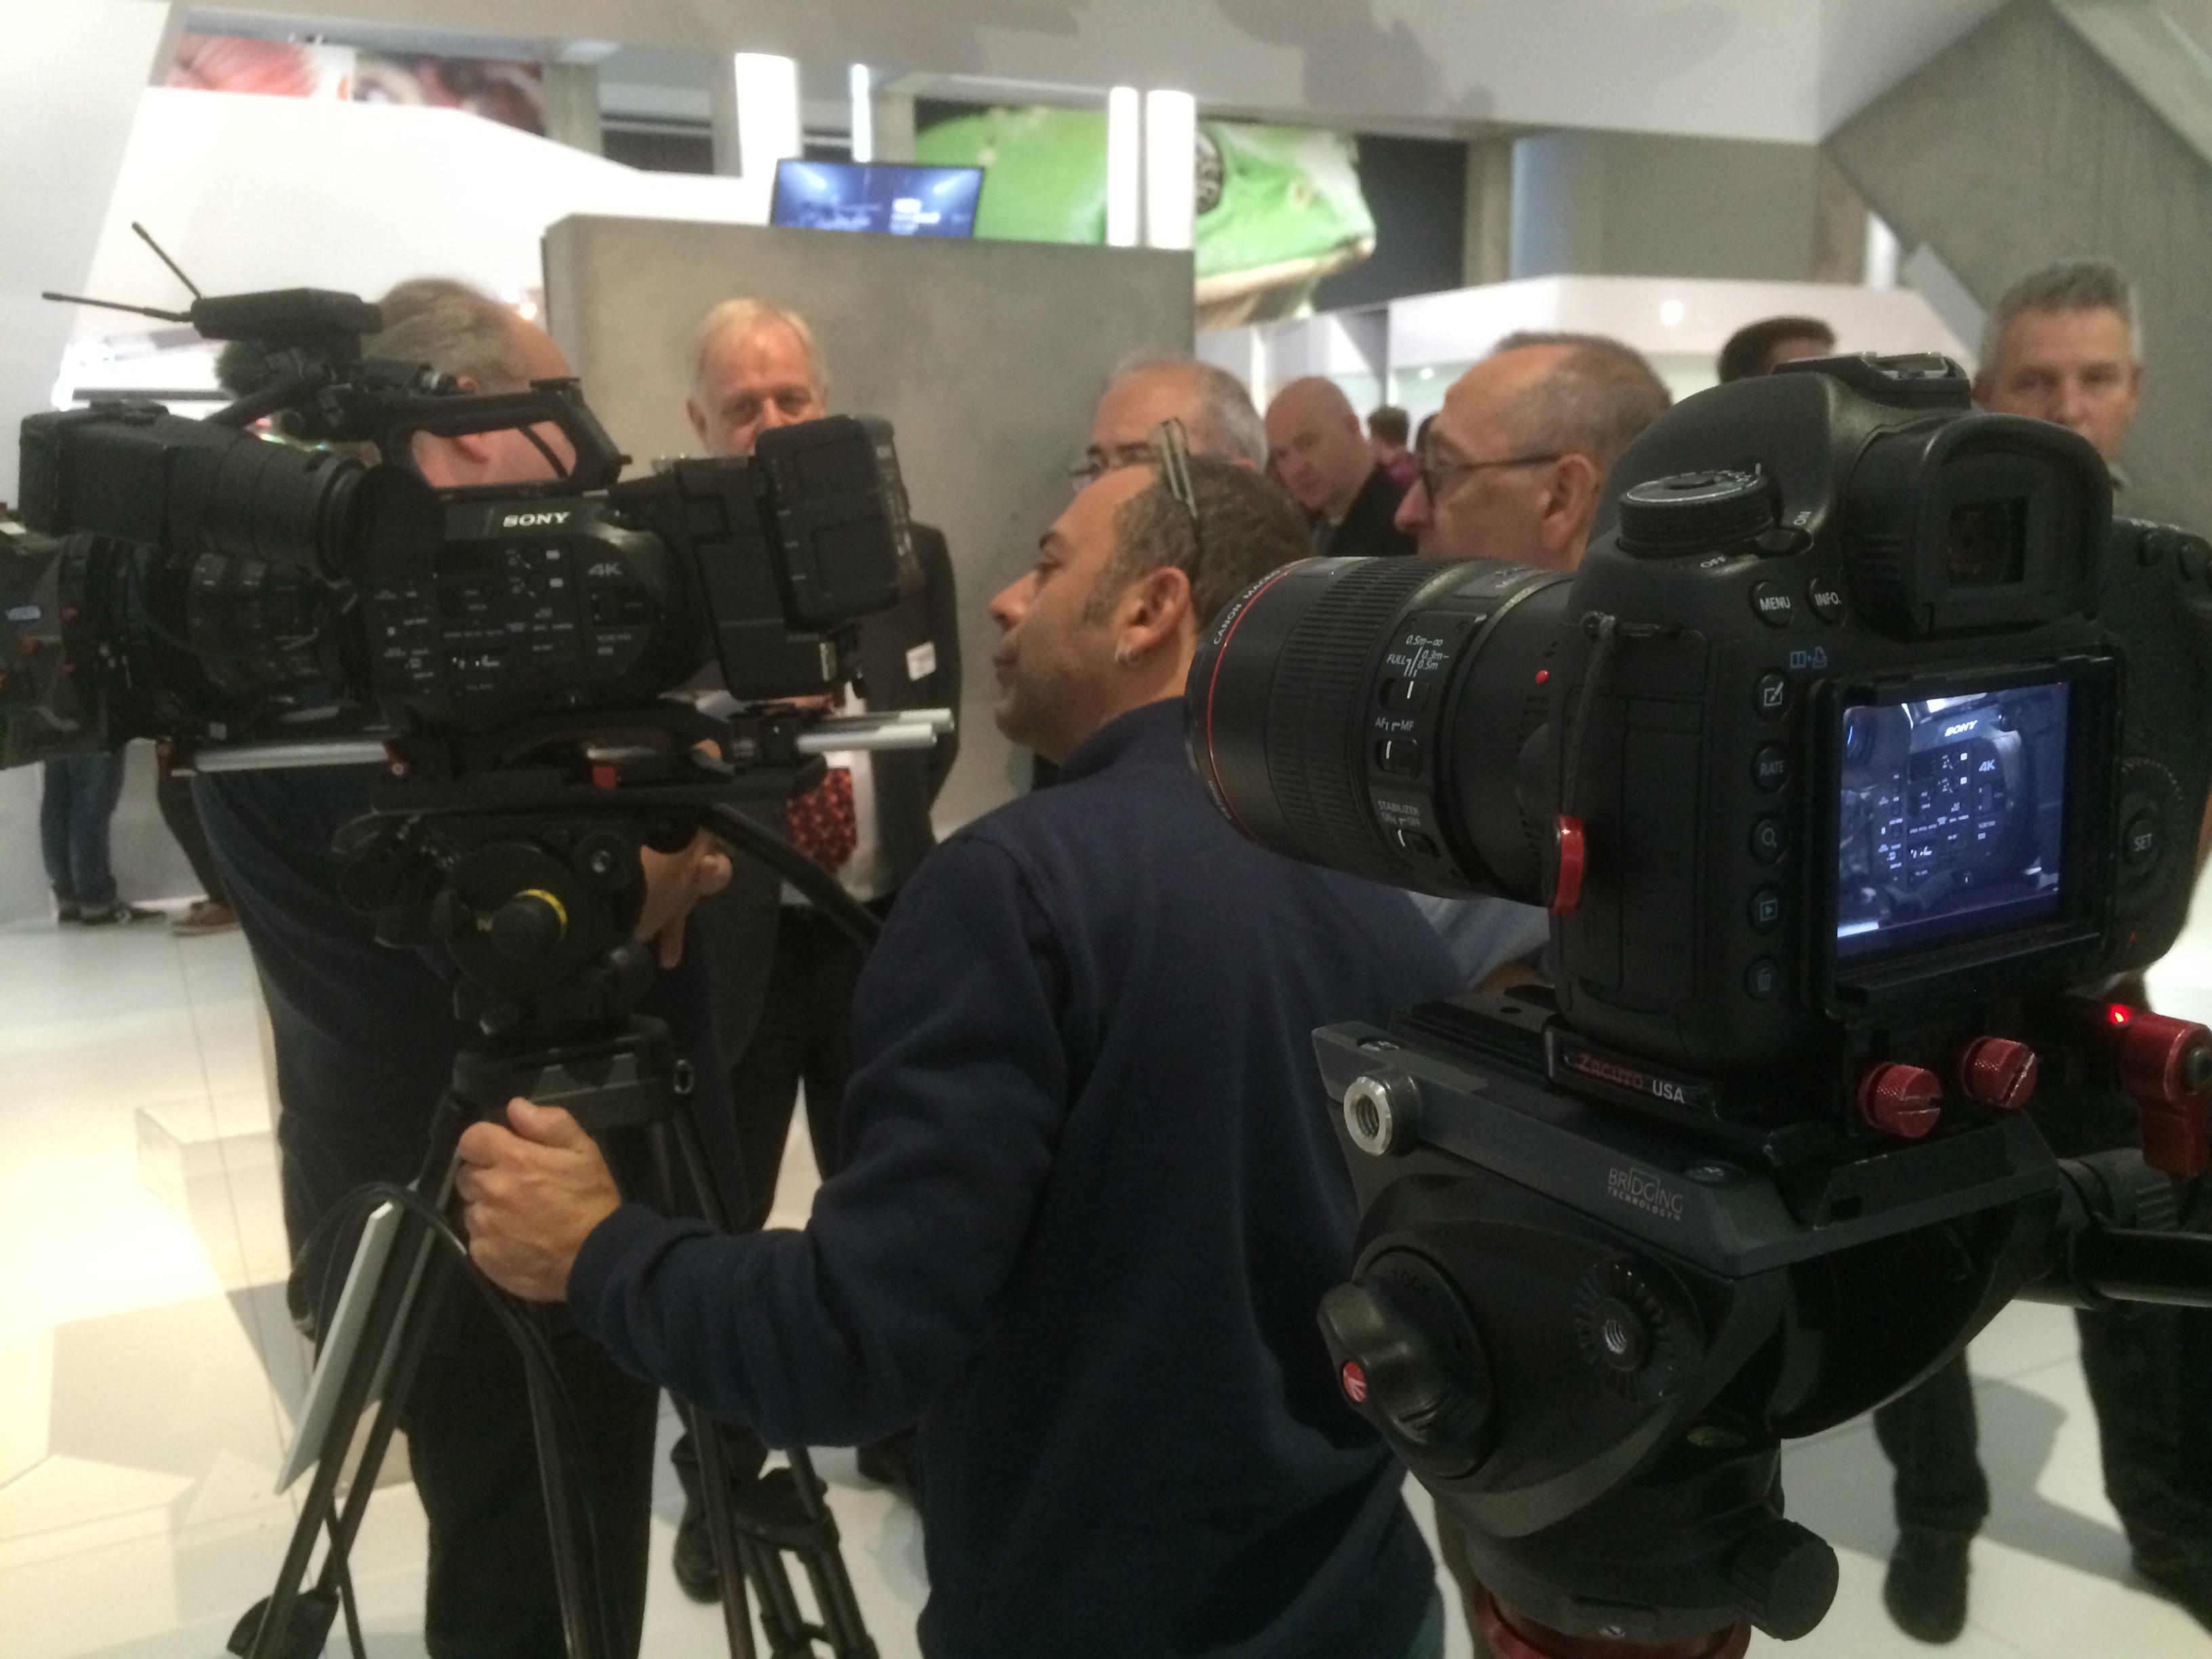 adam plowden videography at ibc show 2014 canon 100mm macro l series sony professional interview